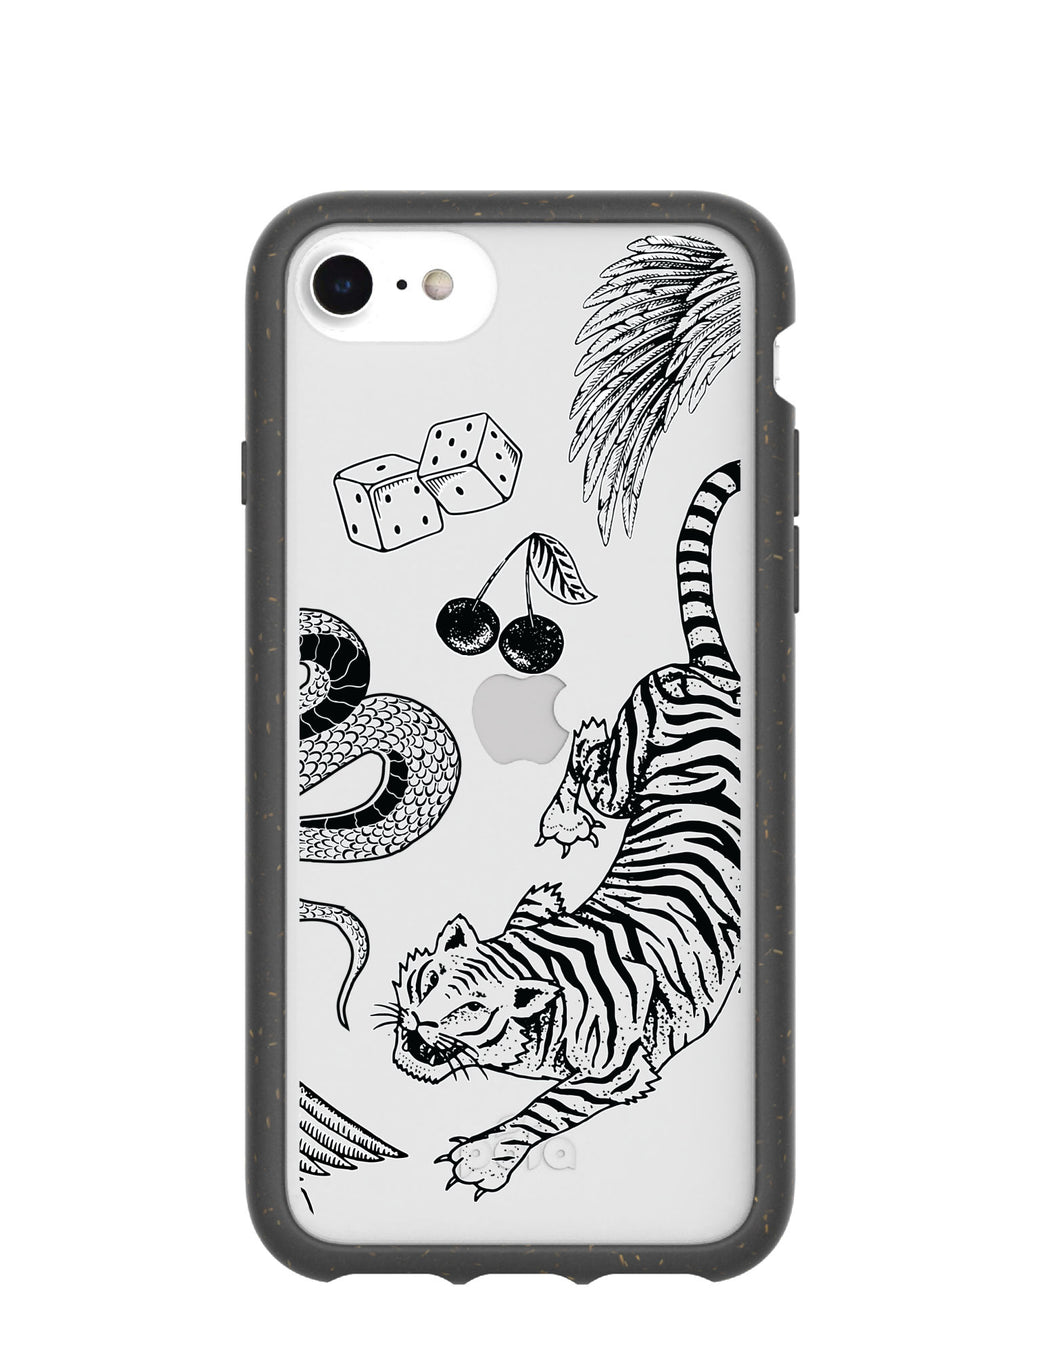 Clear Tiger Luck iPhone 6/6s/7/8/SE Case With Black Ridge